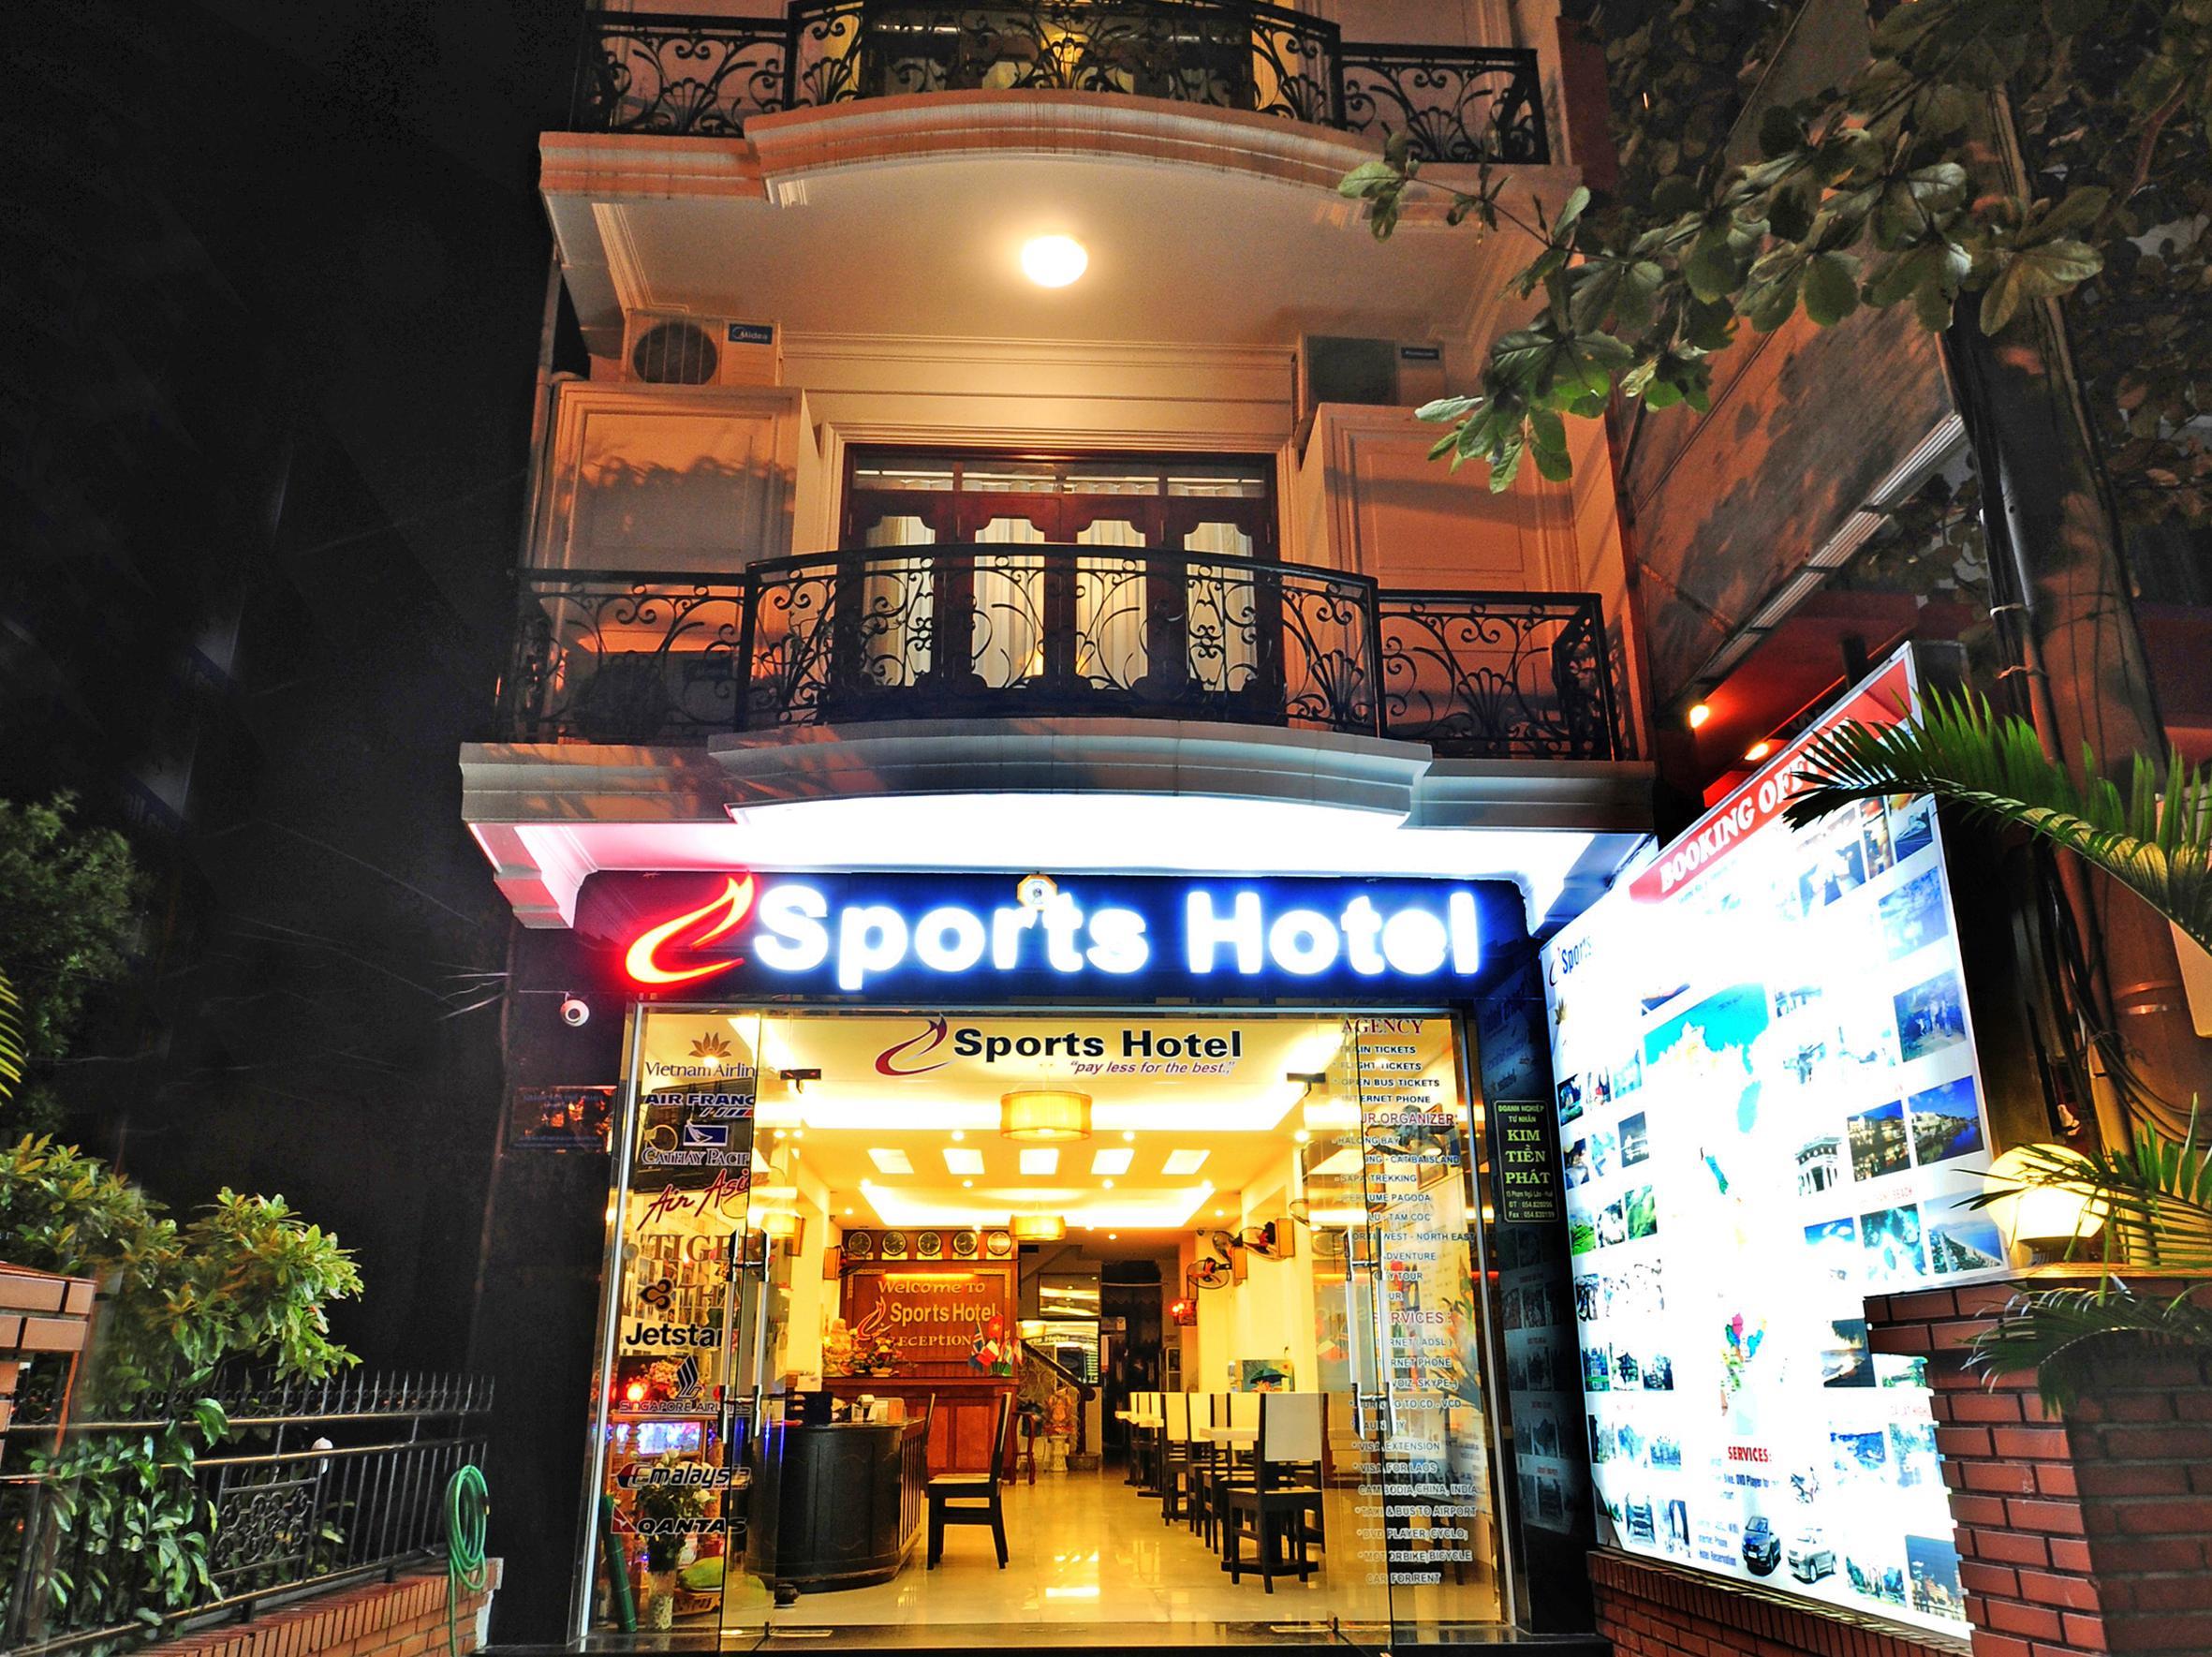 Sports 1 Hotel Shueili Township FAQ 2016, What facilities are there in Sports 1 Hotel Shueili Township 2016, What Languages Spoken are Supported in Sports 1 Hotel Shueili Township 2016, Which payment cards are accepted in Sports 1 Hotel Shueili Township , Shueili Township Sports 1 Hotel room facilities and services Q&A 2016, Shueili Township Sports 1 Hotel online booking services 2016, Shueili Township Sports 1 Hotel address 2016, Shueili Township Sports 1 Hotel telephone number 2016,Shueili Township Sports 1 Hotel map 2016, Shueili Township Sports 1 Hotel traffic guide 2016, how to go Shueili Township Sports 1 Hotel, Shueili Township Sports 1 Hotel booking online 2016, Shueili Township Sports 1 Hotel room types 2016.